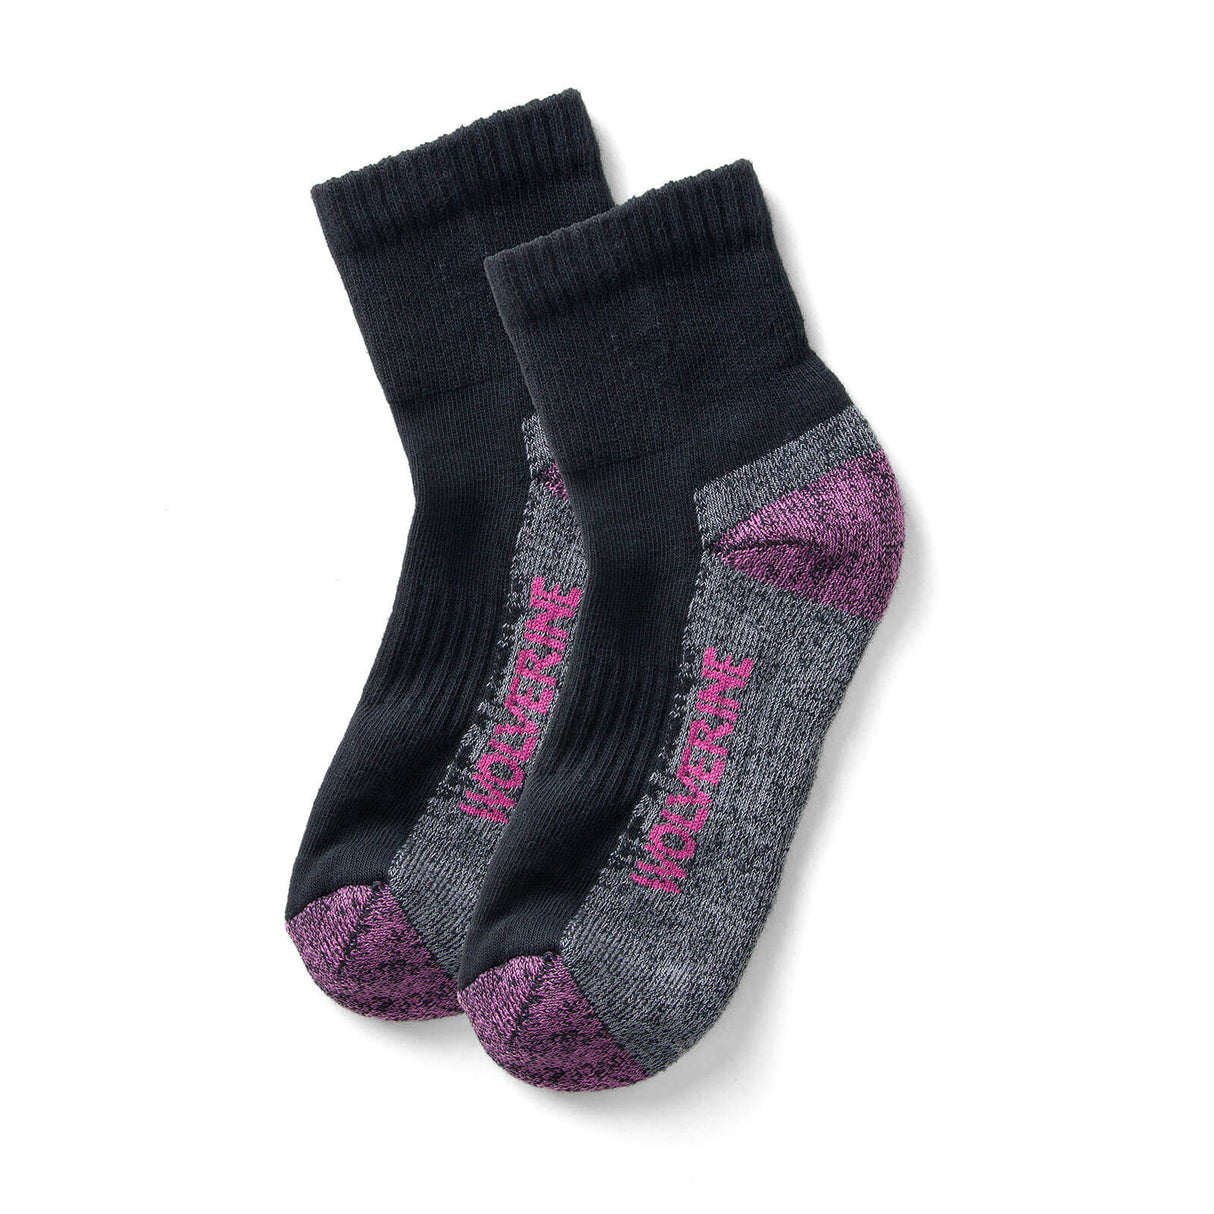 2Pk Wmns Cotton St Qtr Socks (Out of Stock)